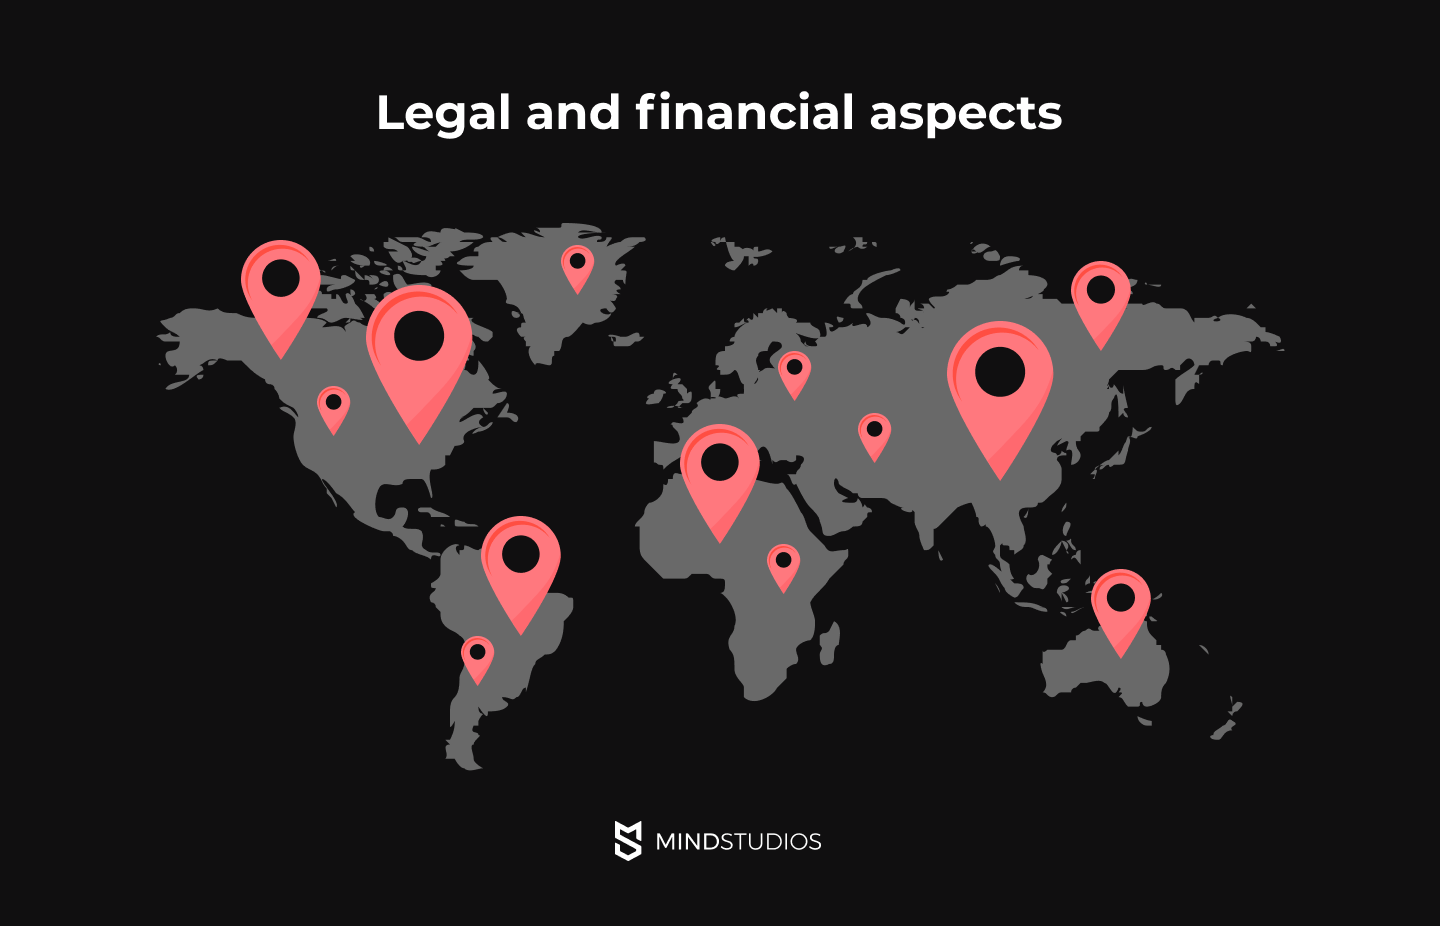 Legal and financial aspects